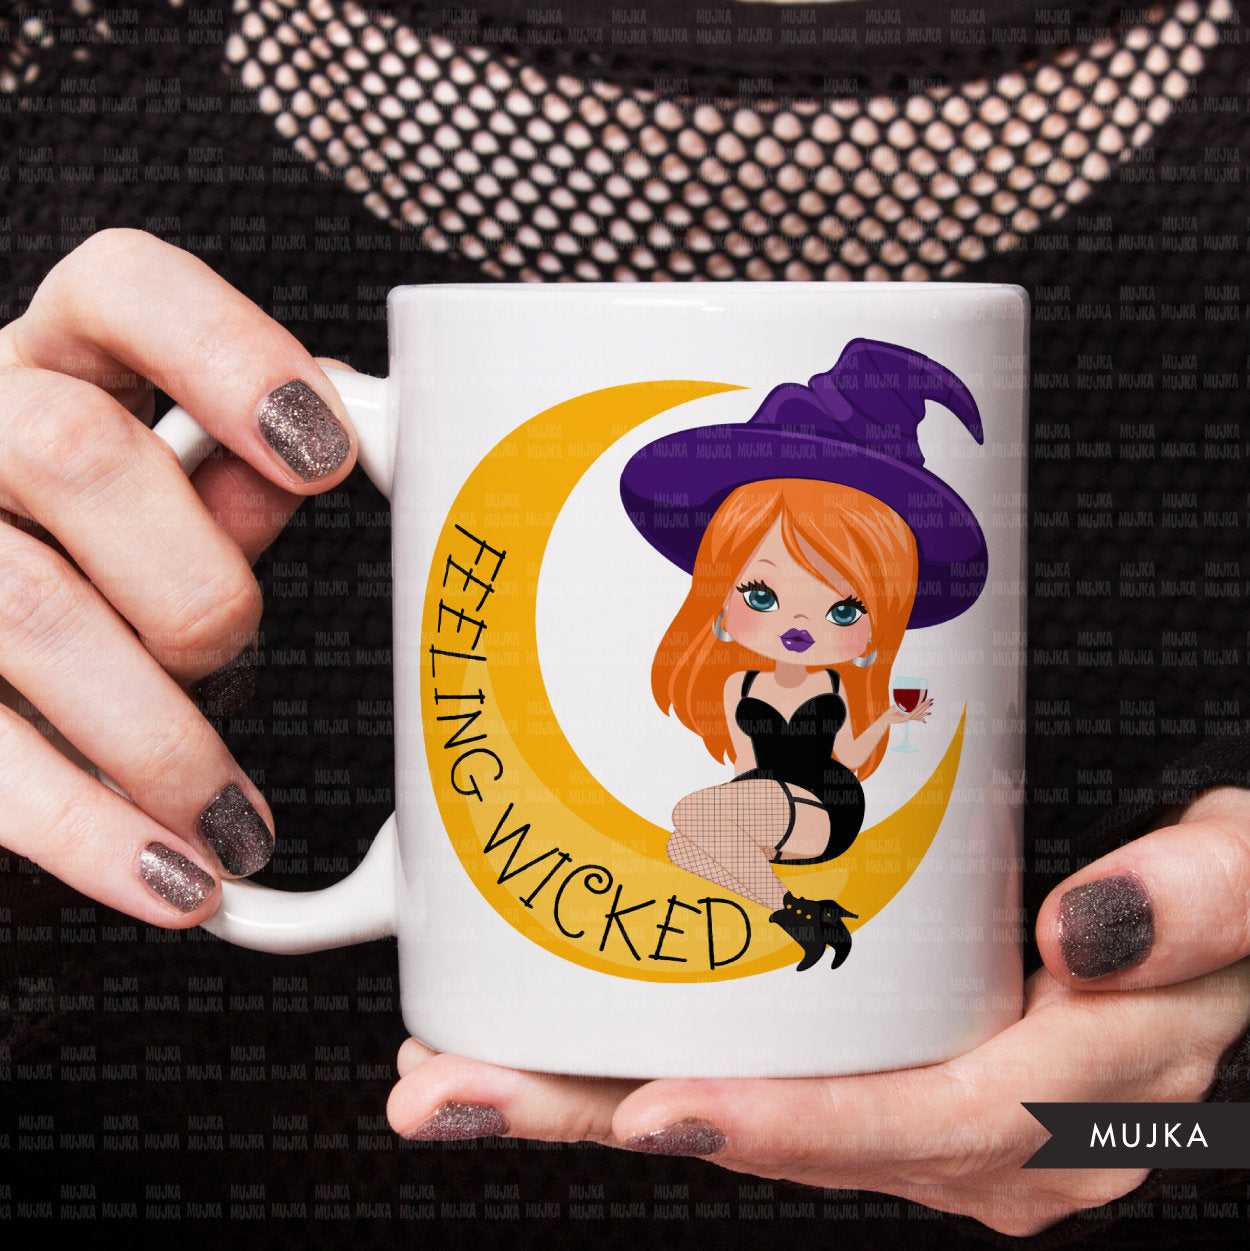 If She's A Creeper She Is A Keeper Png, Funny Halloween Png, Halloween –  buydesigntshirt